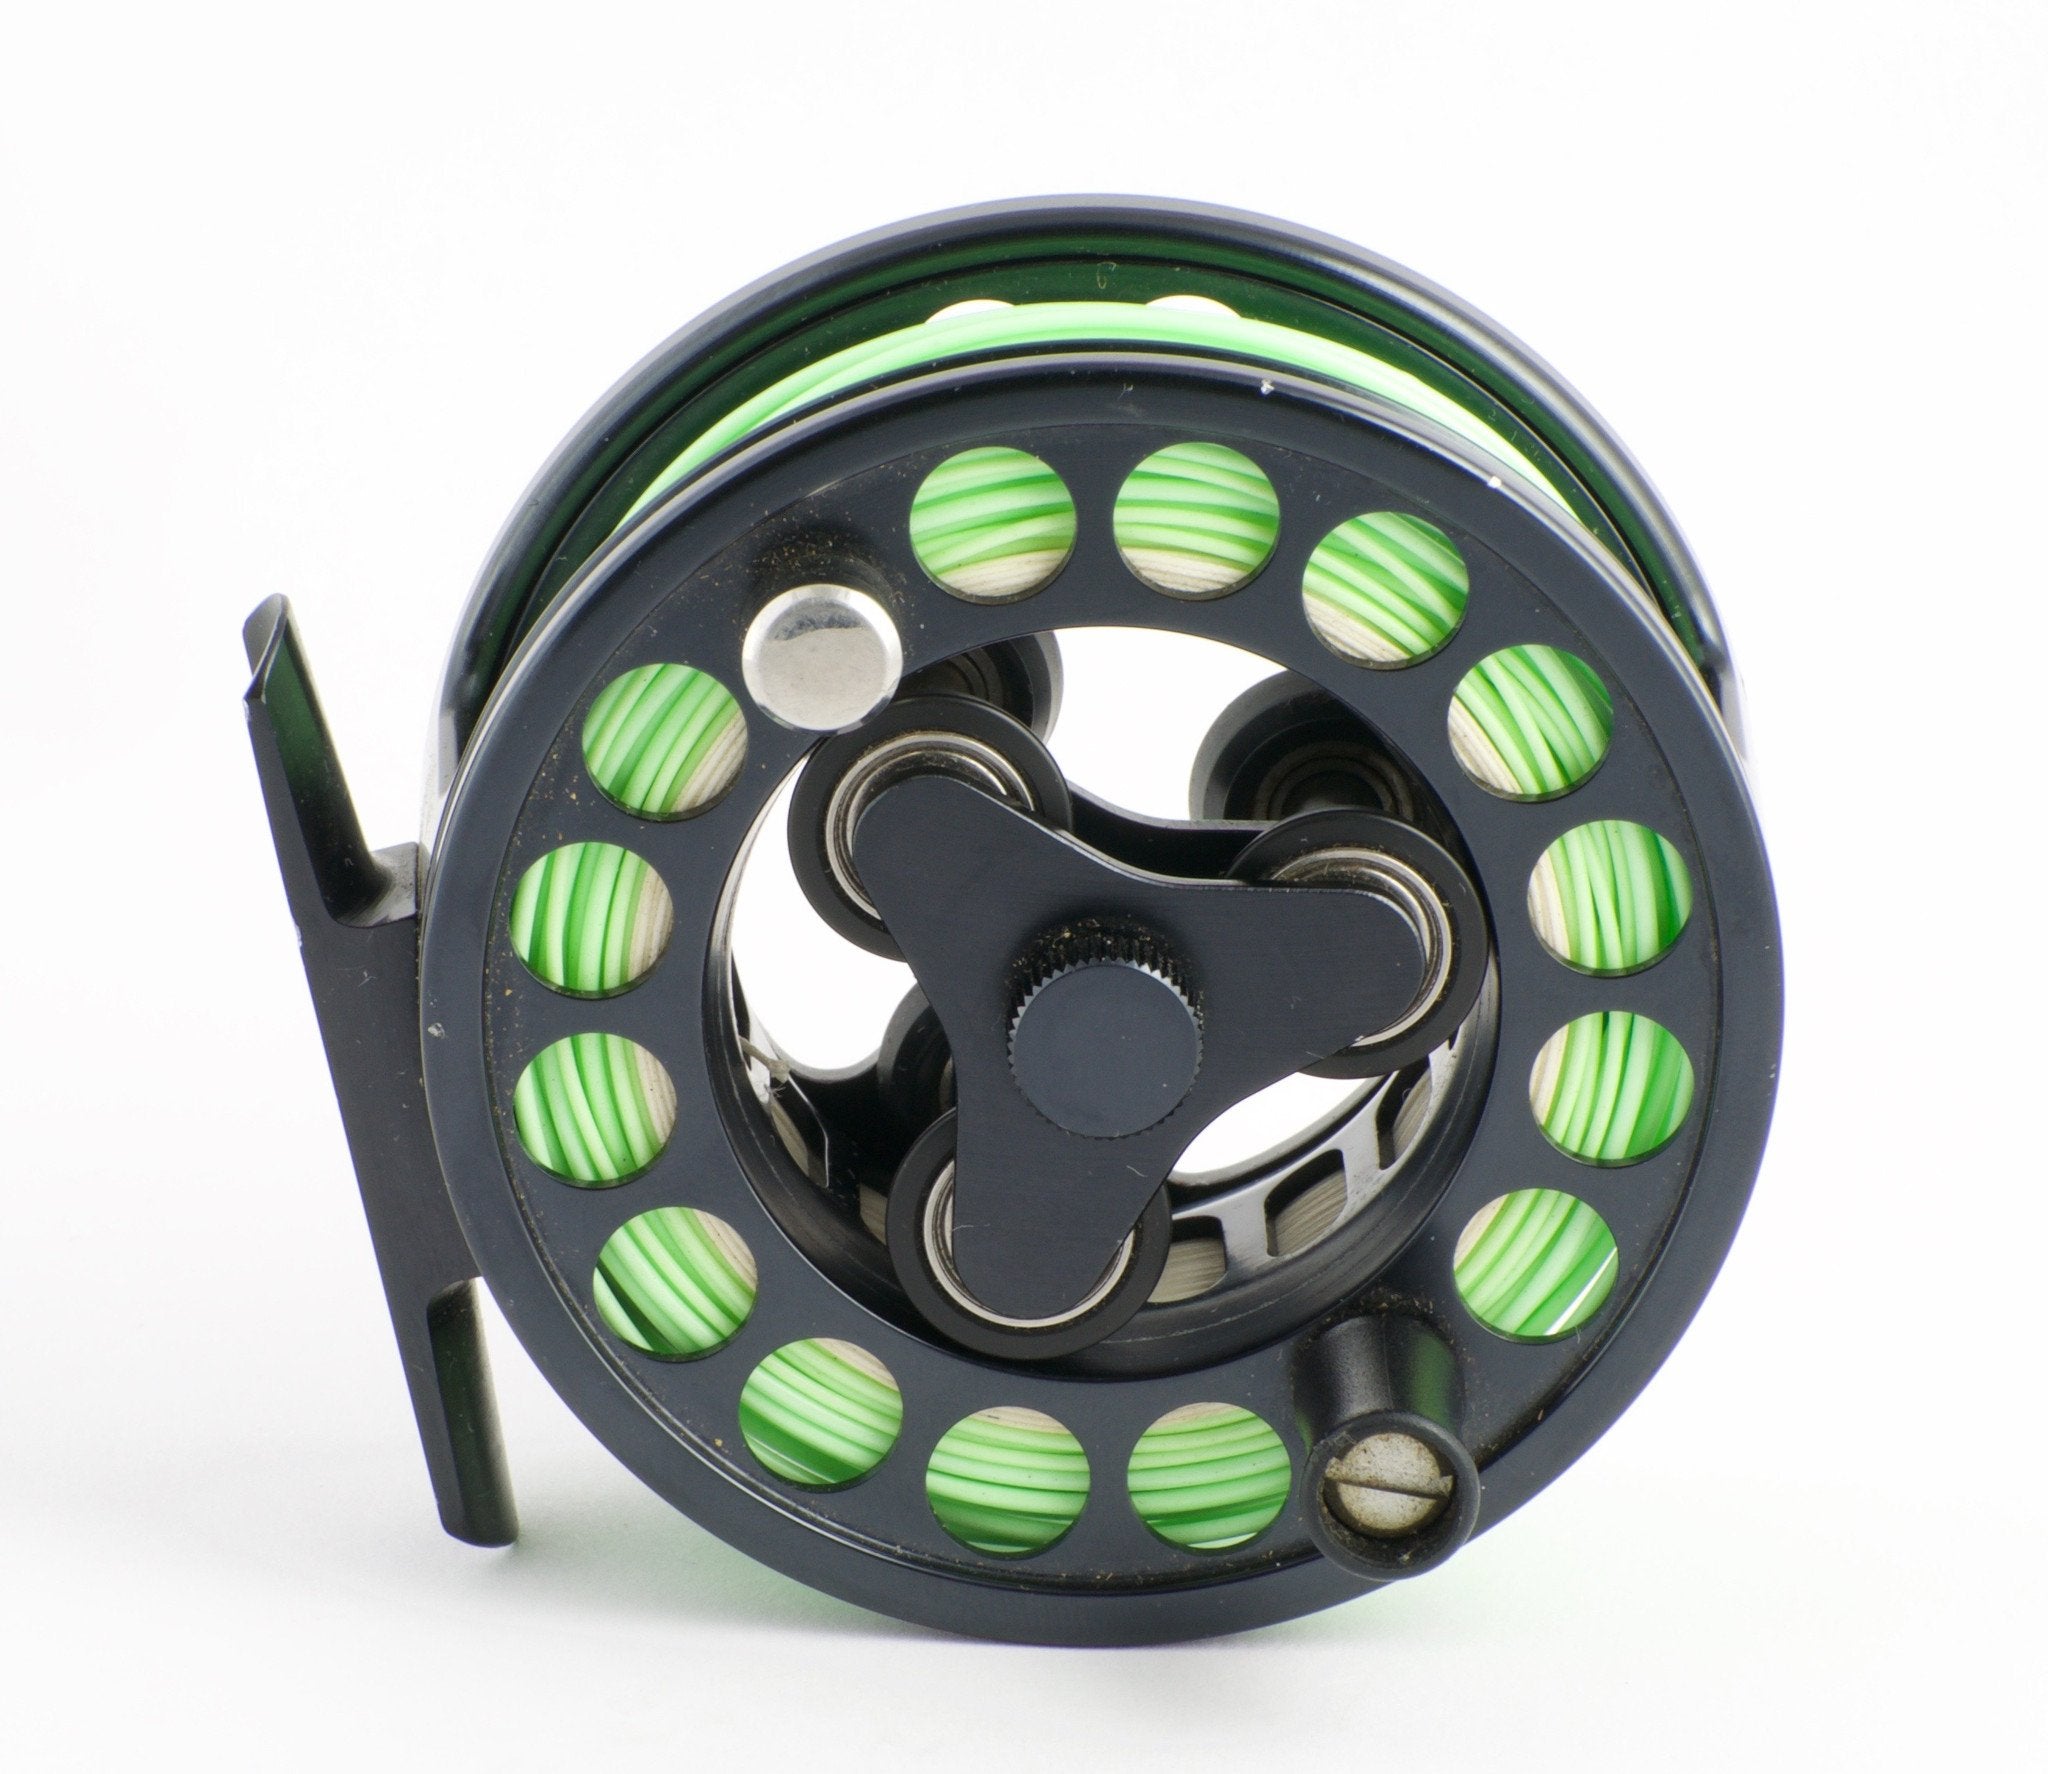 The Original series, the reel that revolutionized fly fishing